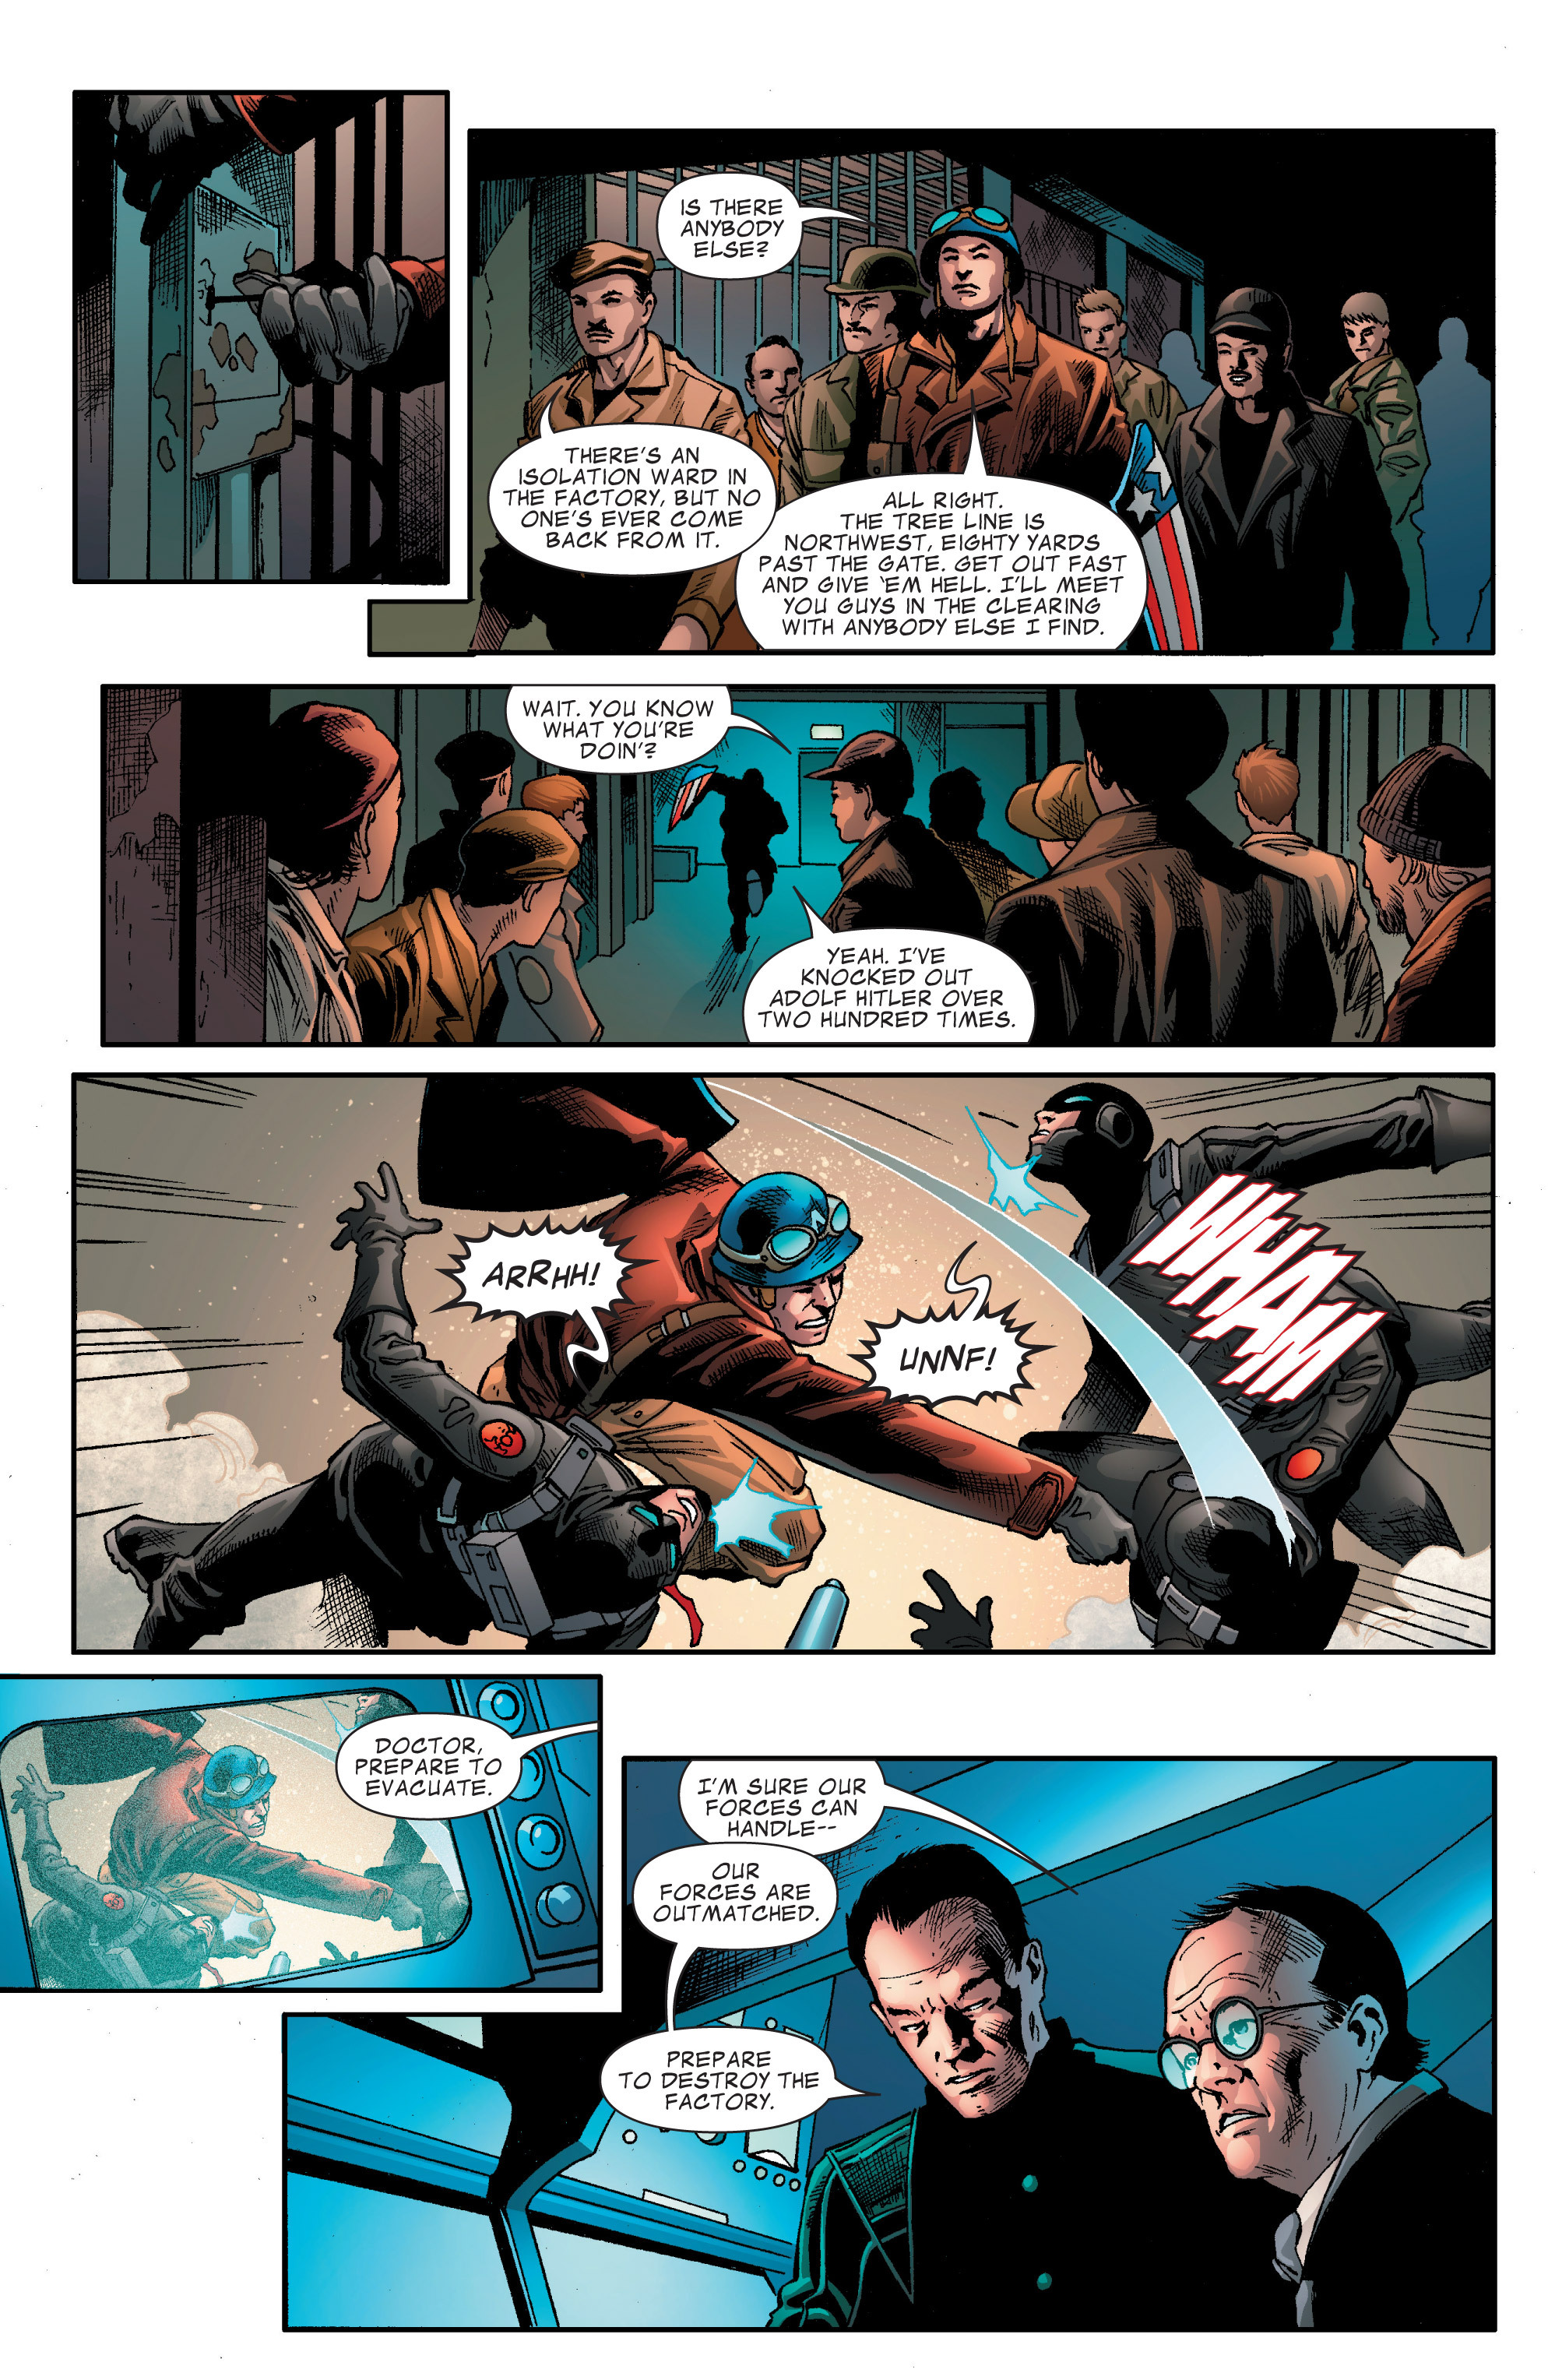 Captain America: The First Avenger Adaptation 1 Page 15